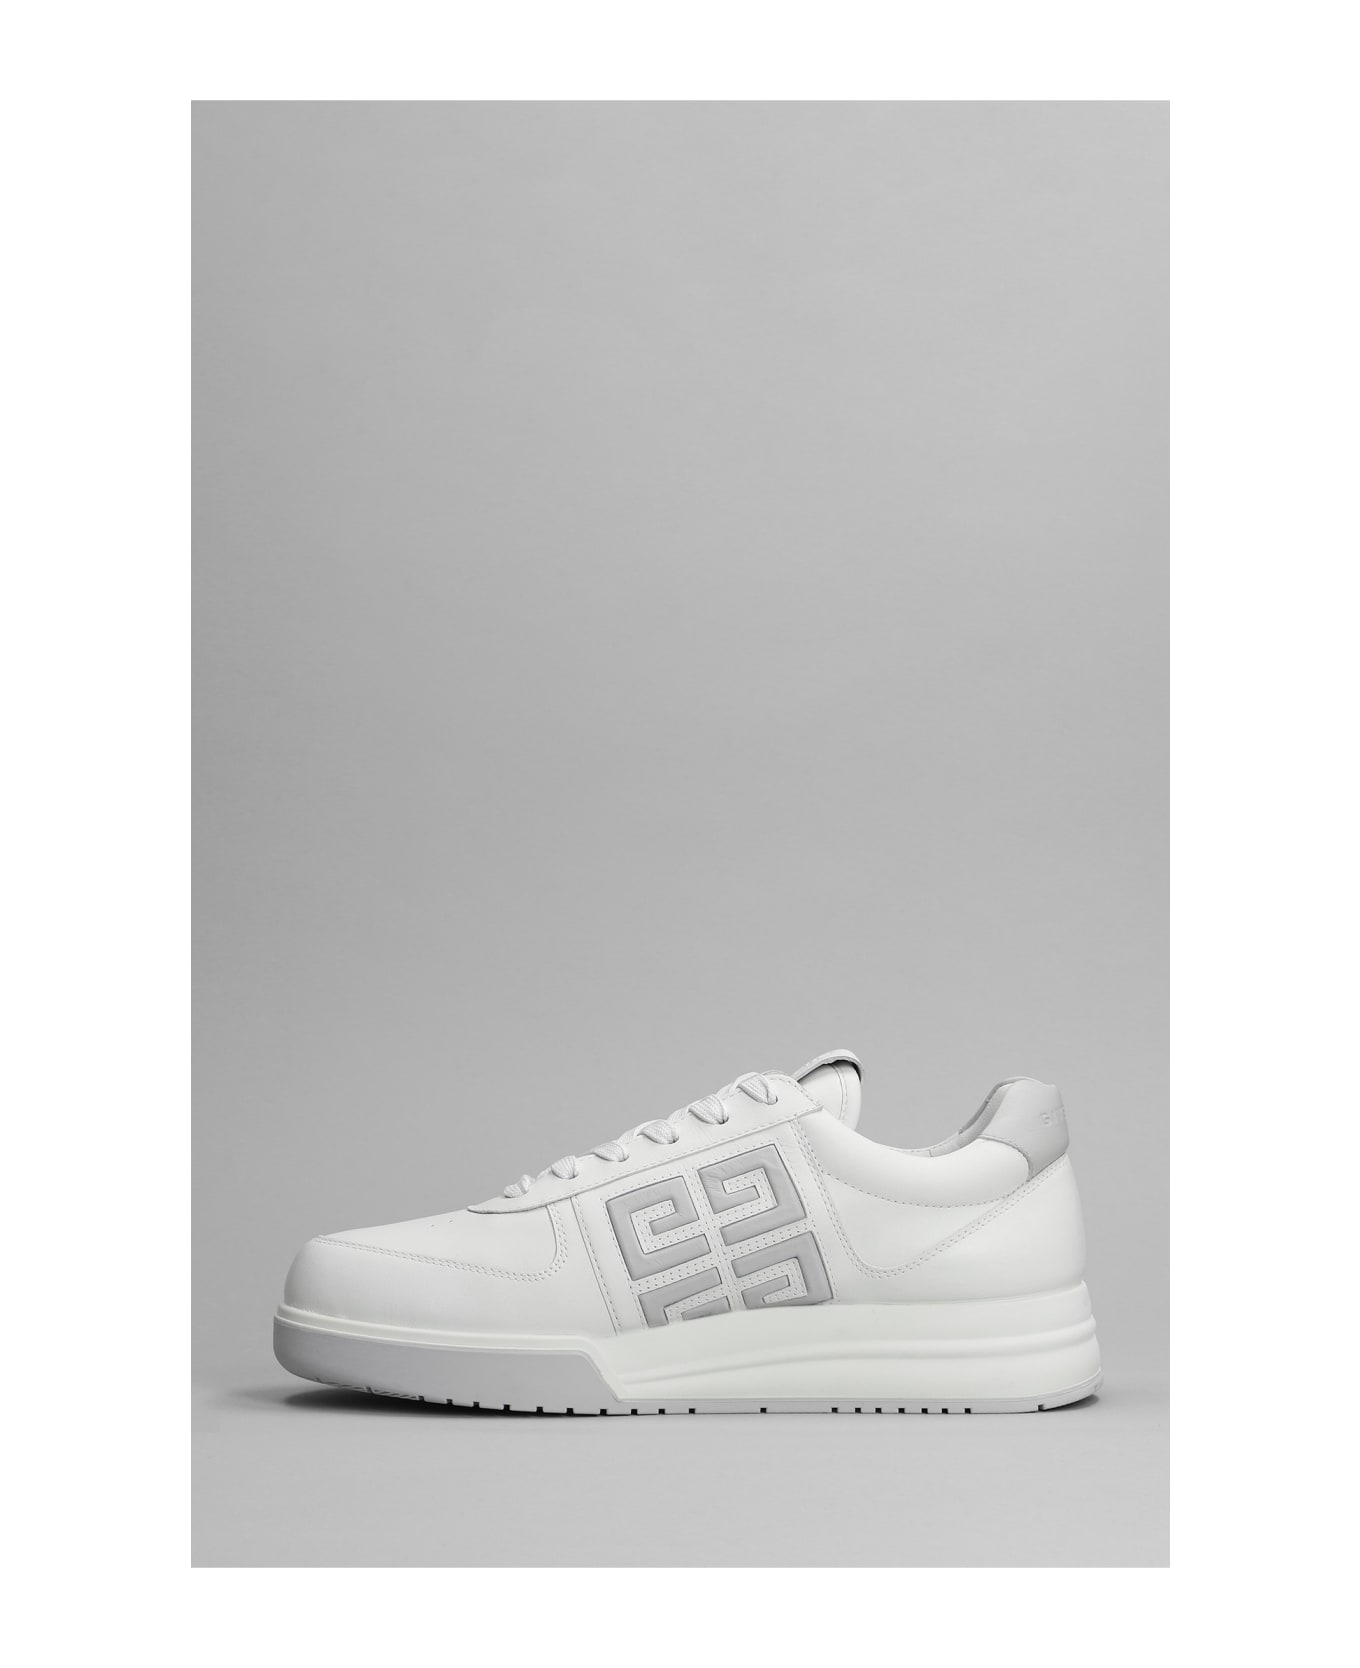 Givenchy G4 Low Sneakers In White Leather - white